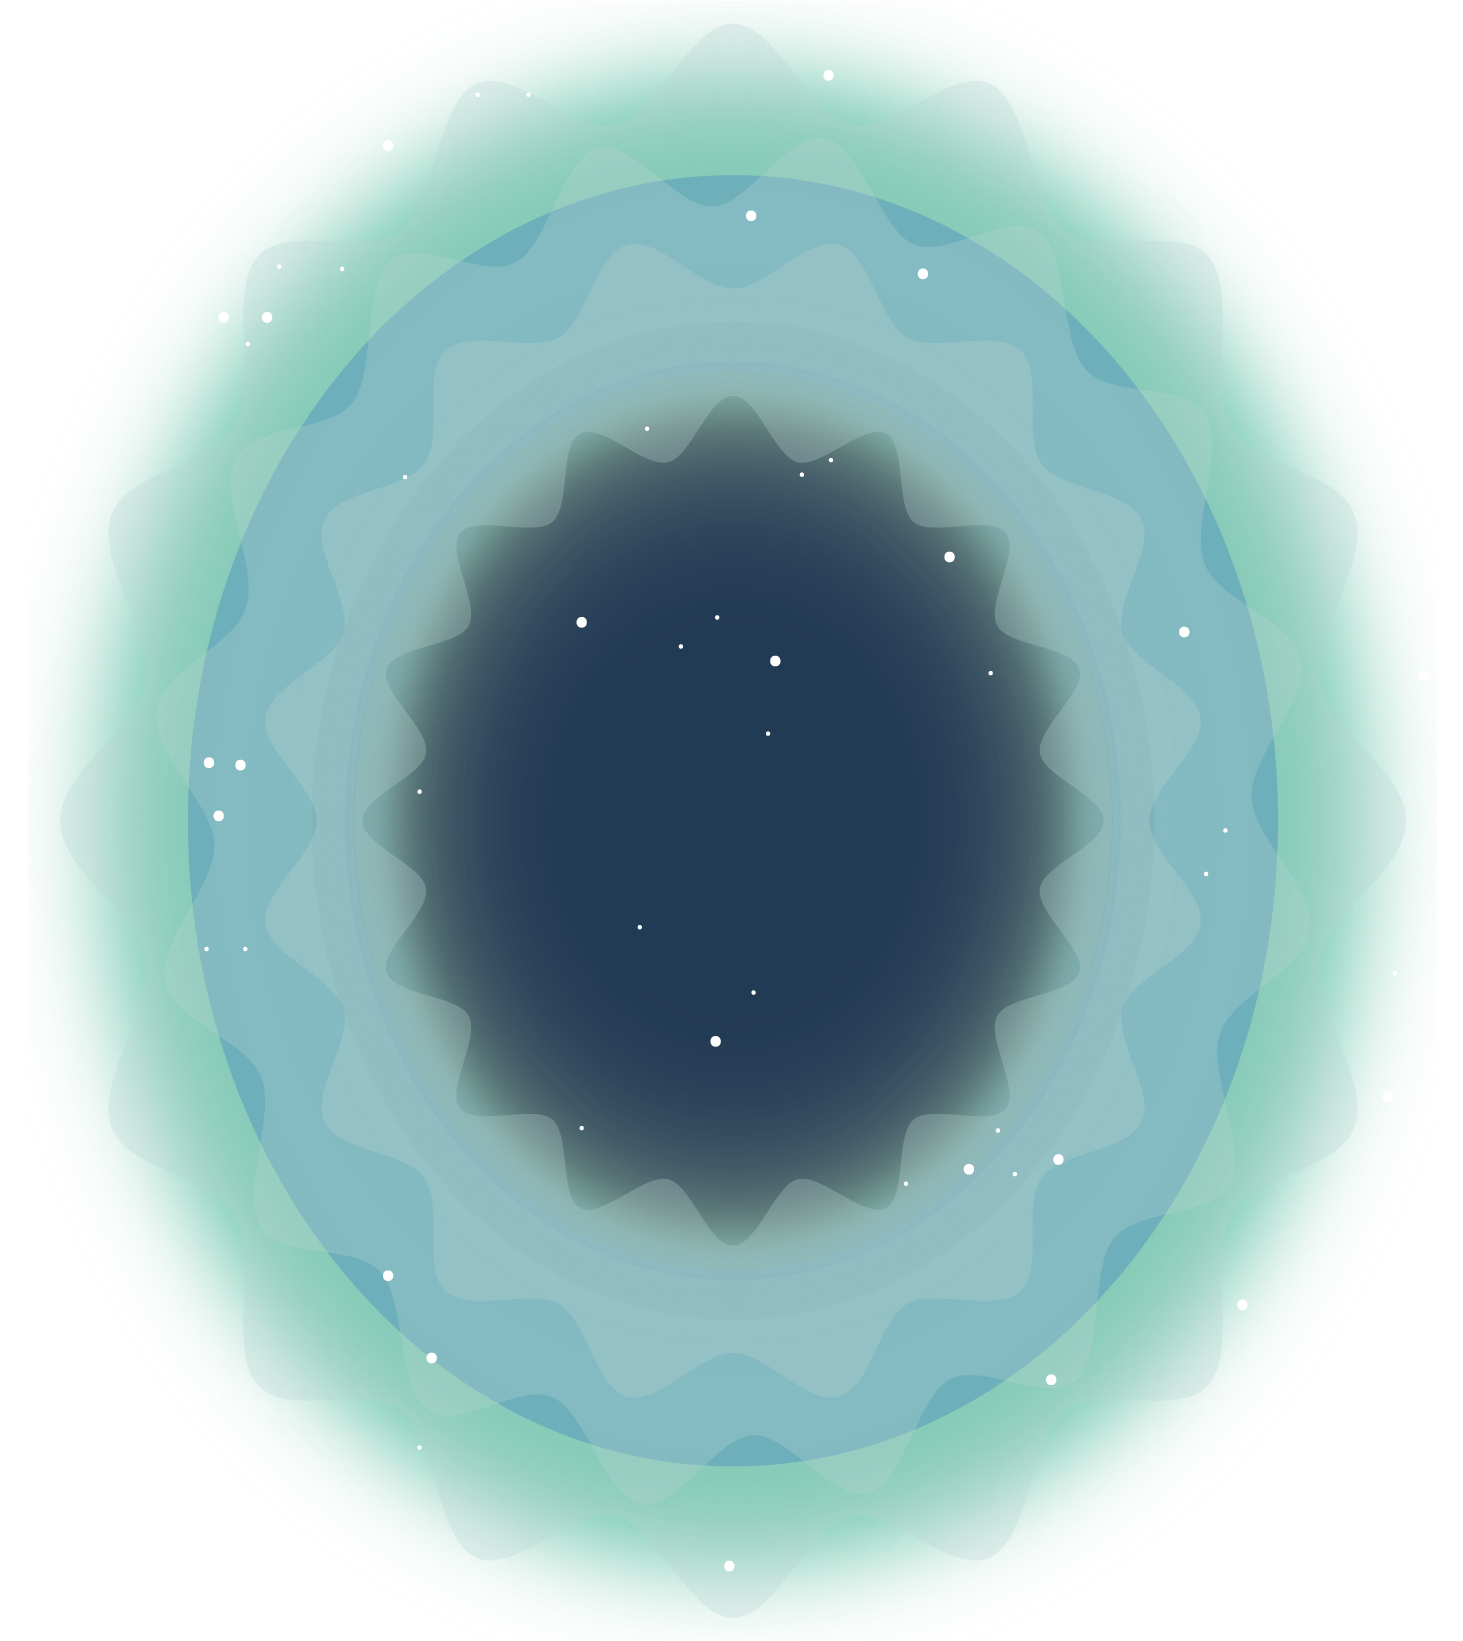 A large vertically-oriented oval shape with rounded waves around the edge, this graphic has a flower-like appearance. Smaller transparent circles with the same wavy edge are layered inward to create an inner starburst shape. The outer rings are a very light green color and they move inward into different light blue colors and finally to a center starburst shape that is a dark blue. White dots representing stars speckle the image.